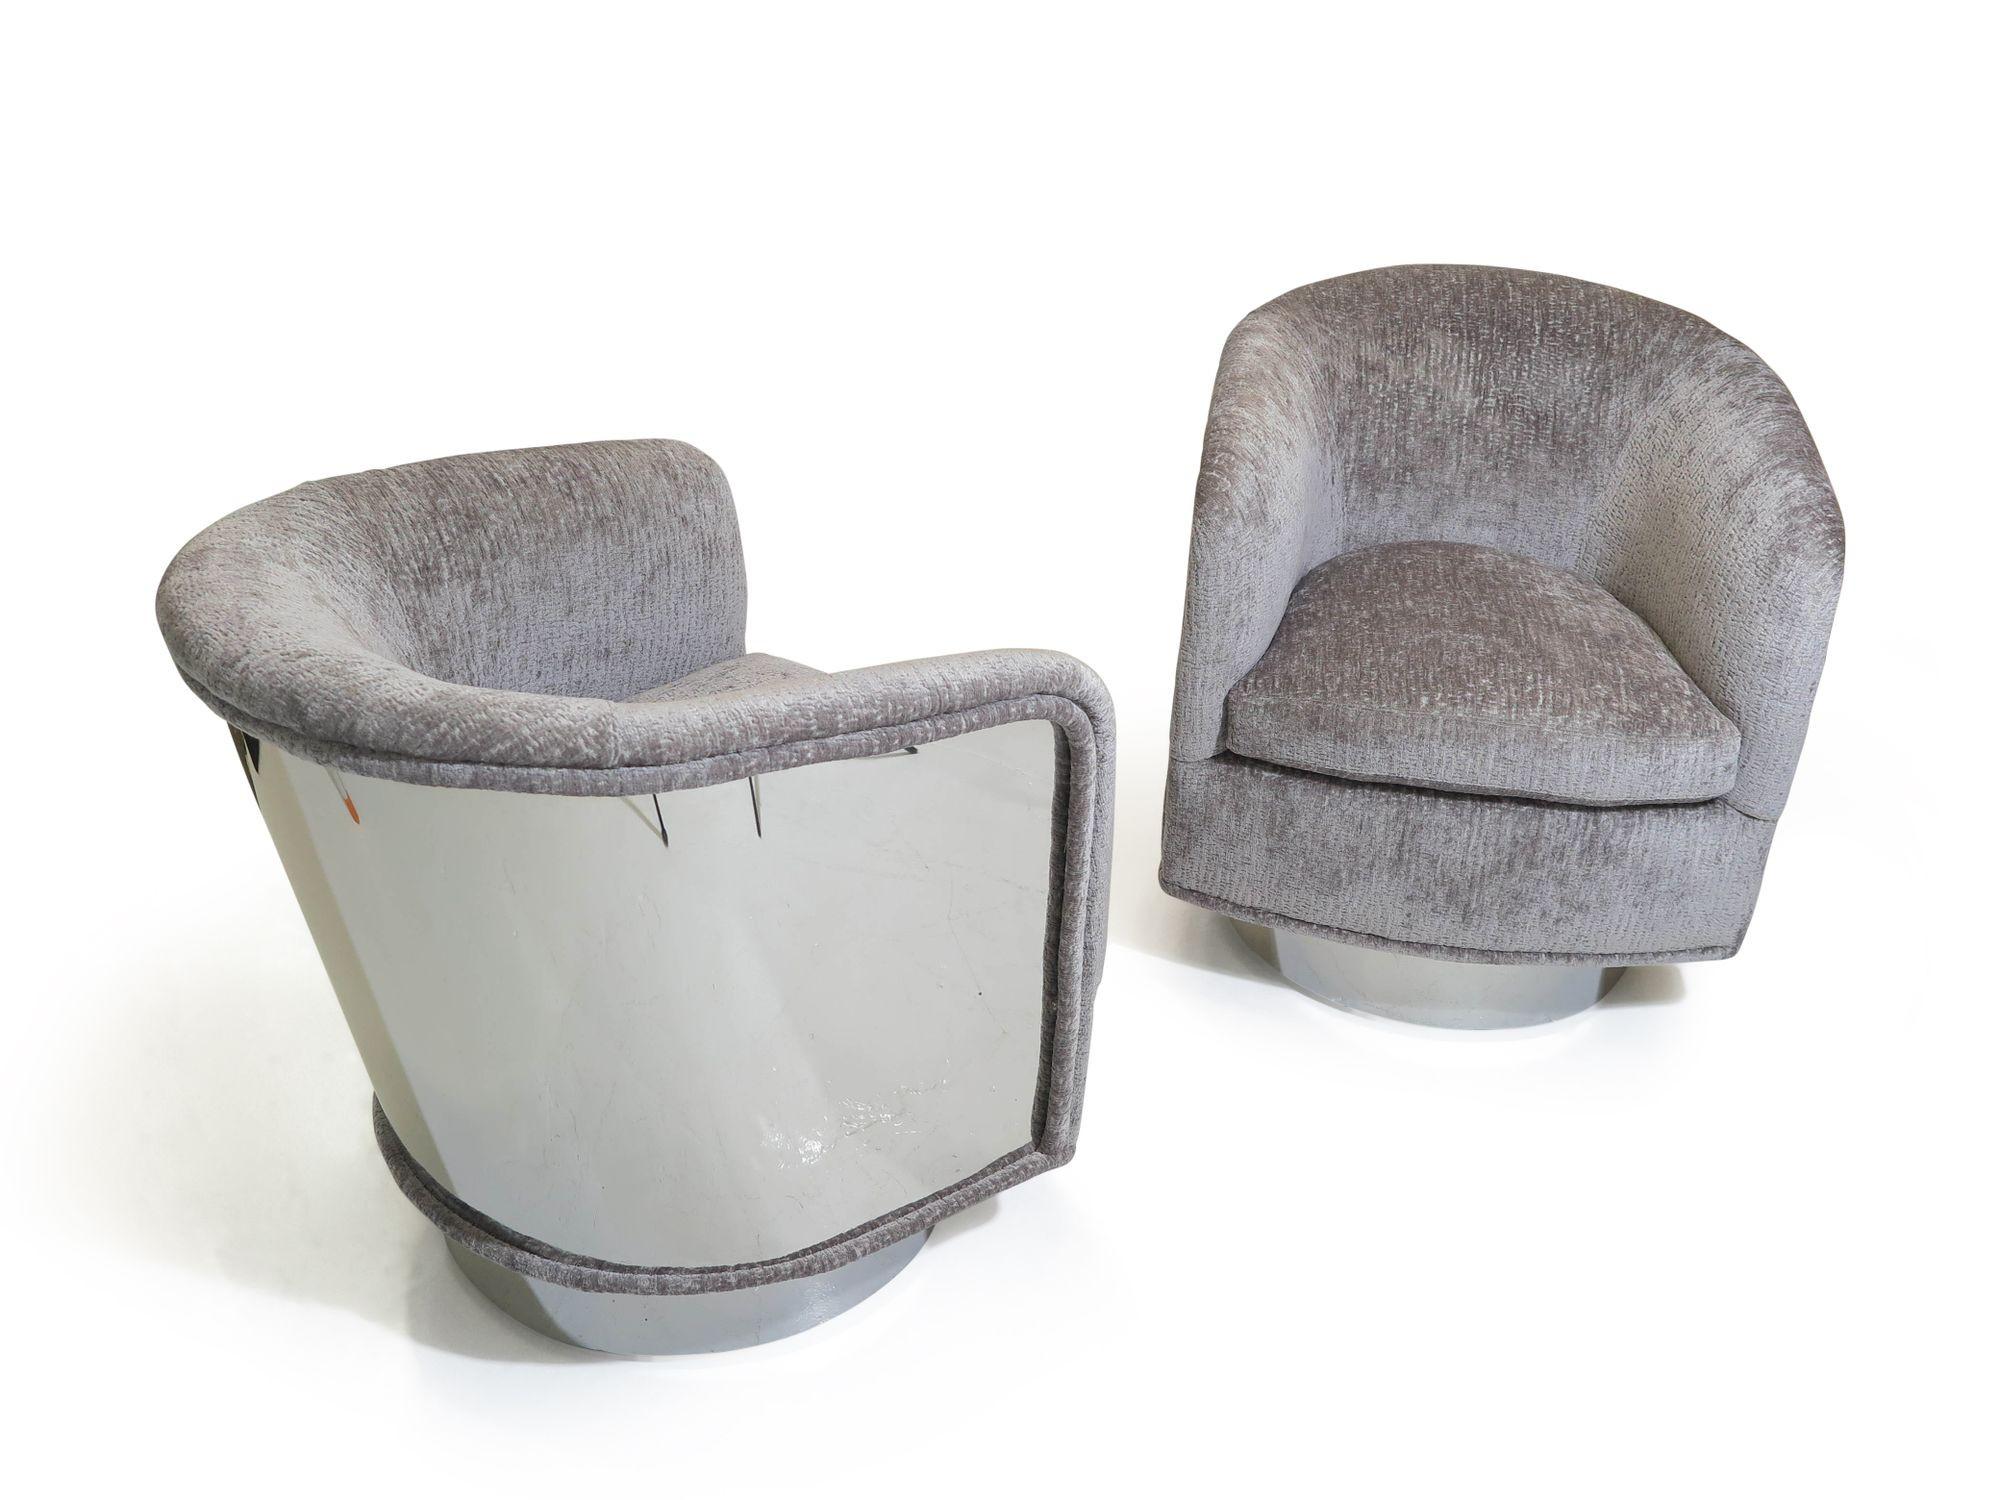 Pair of Swivel & Tilt lounge chairs designed by Milo Baughman for Thayer Coggin. Features a 360 degree swiveling mechanism with tilt. The chairs are very comfortable and flex as ones moves. Polished steel backs in a mirror finish and upholstered in